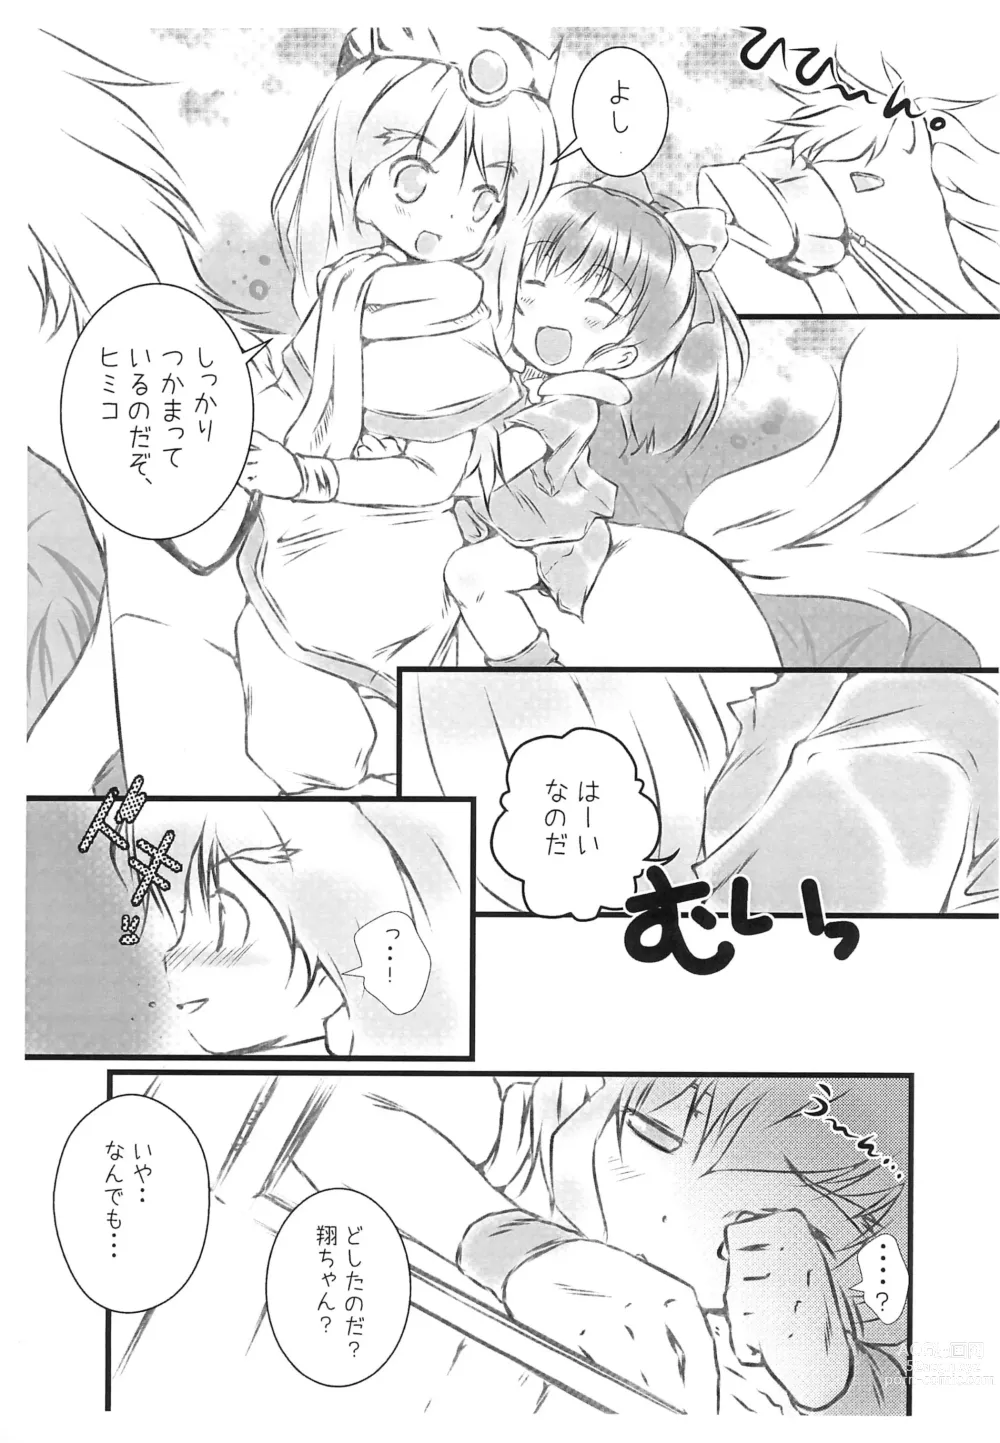 Page 9 of doujinshi STEP UP